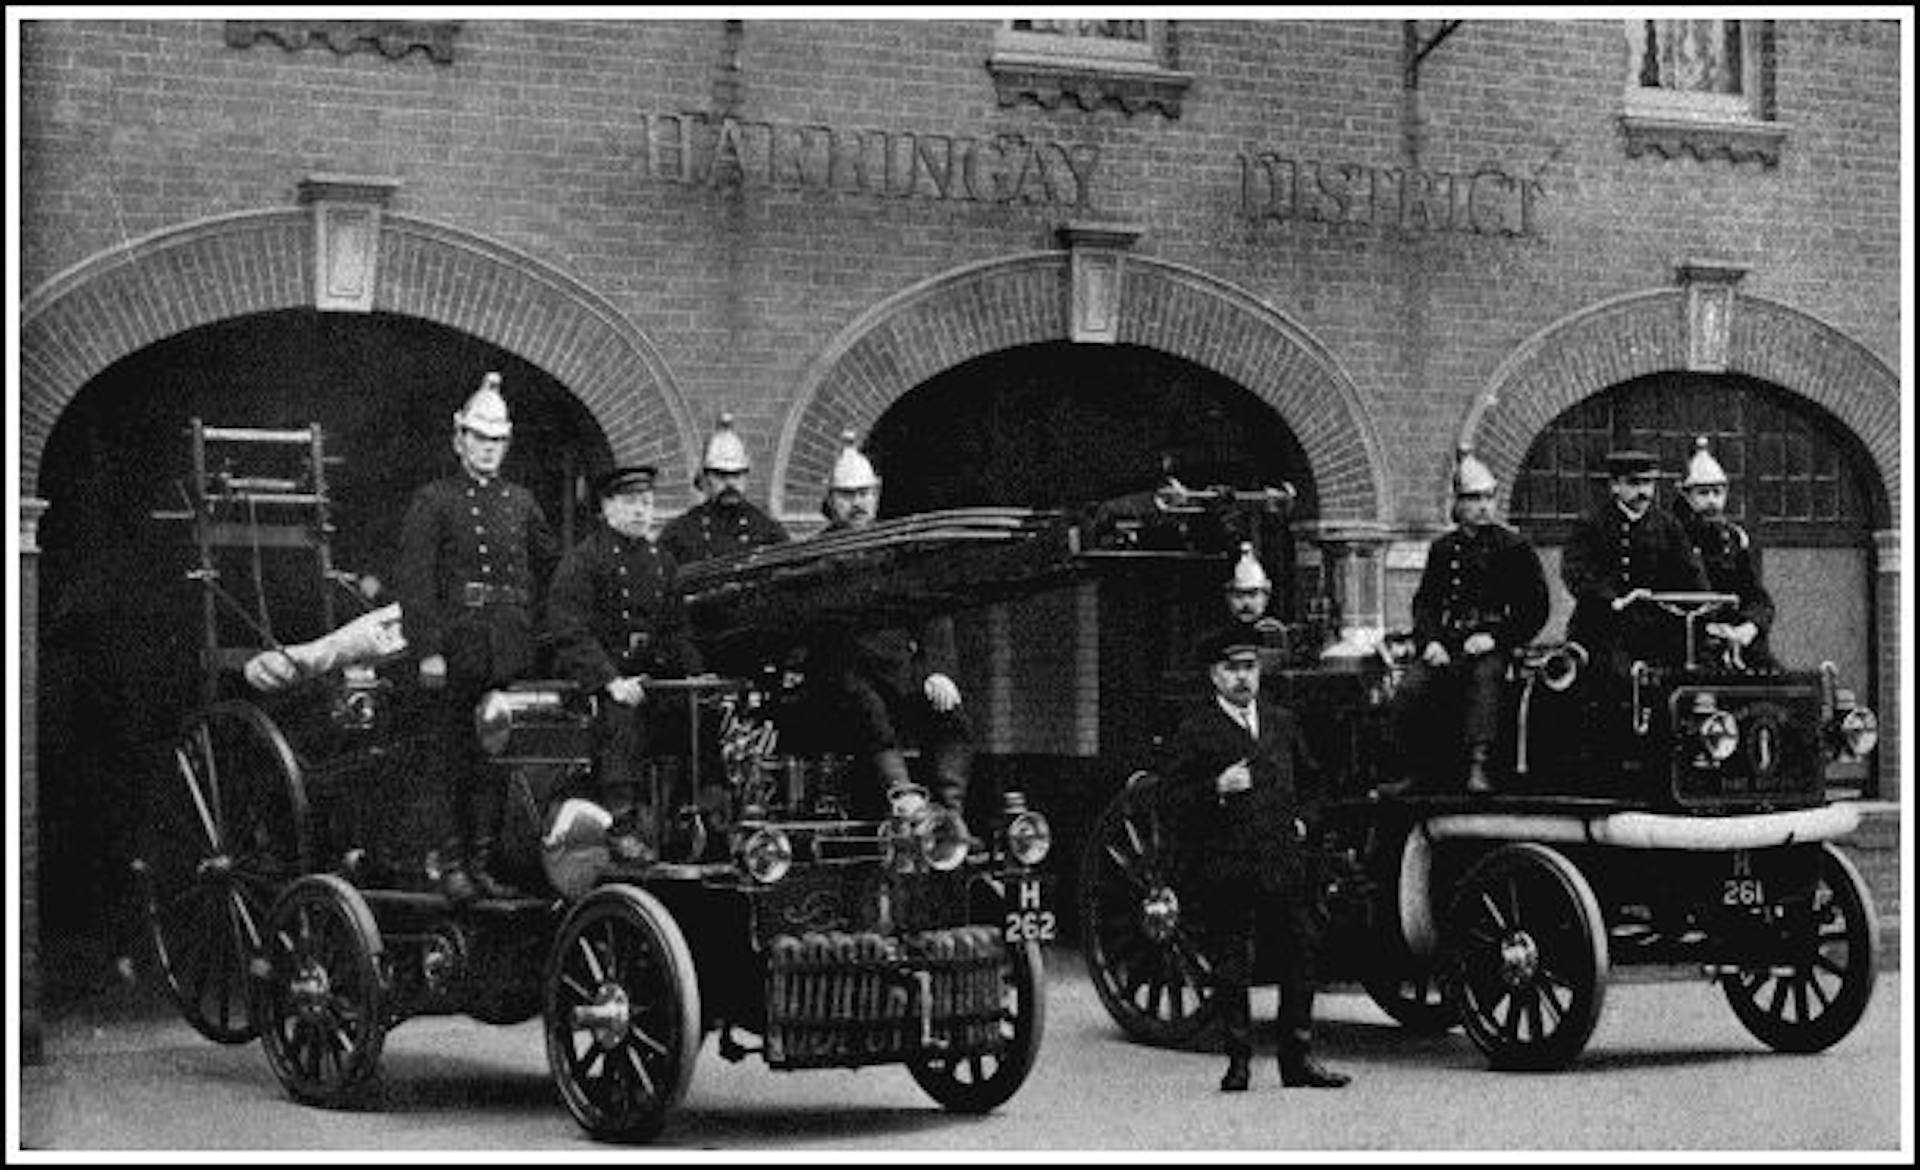 Two Motor Fire-engines built by Messrs. Merryweather, London. That on the left is driven by petrol, and in addition to pumping-gear carries a wheeled fire-escape. That on the right is driven by steam. Both types are much faster than horses, being able to travel at a rate of over 20 miles an hour.